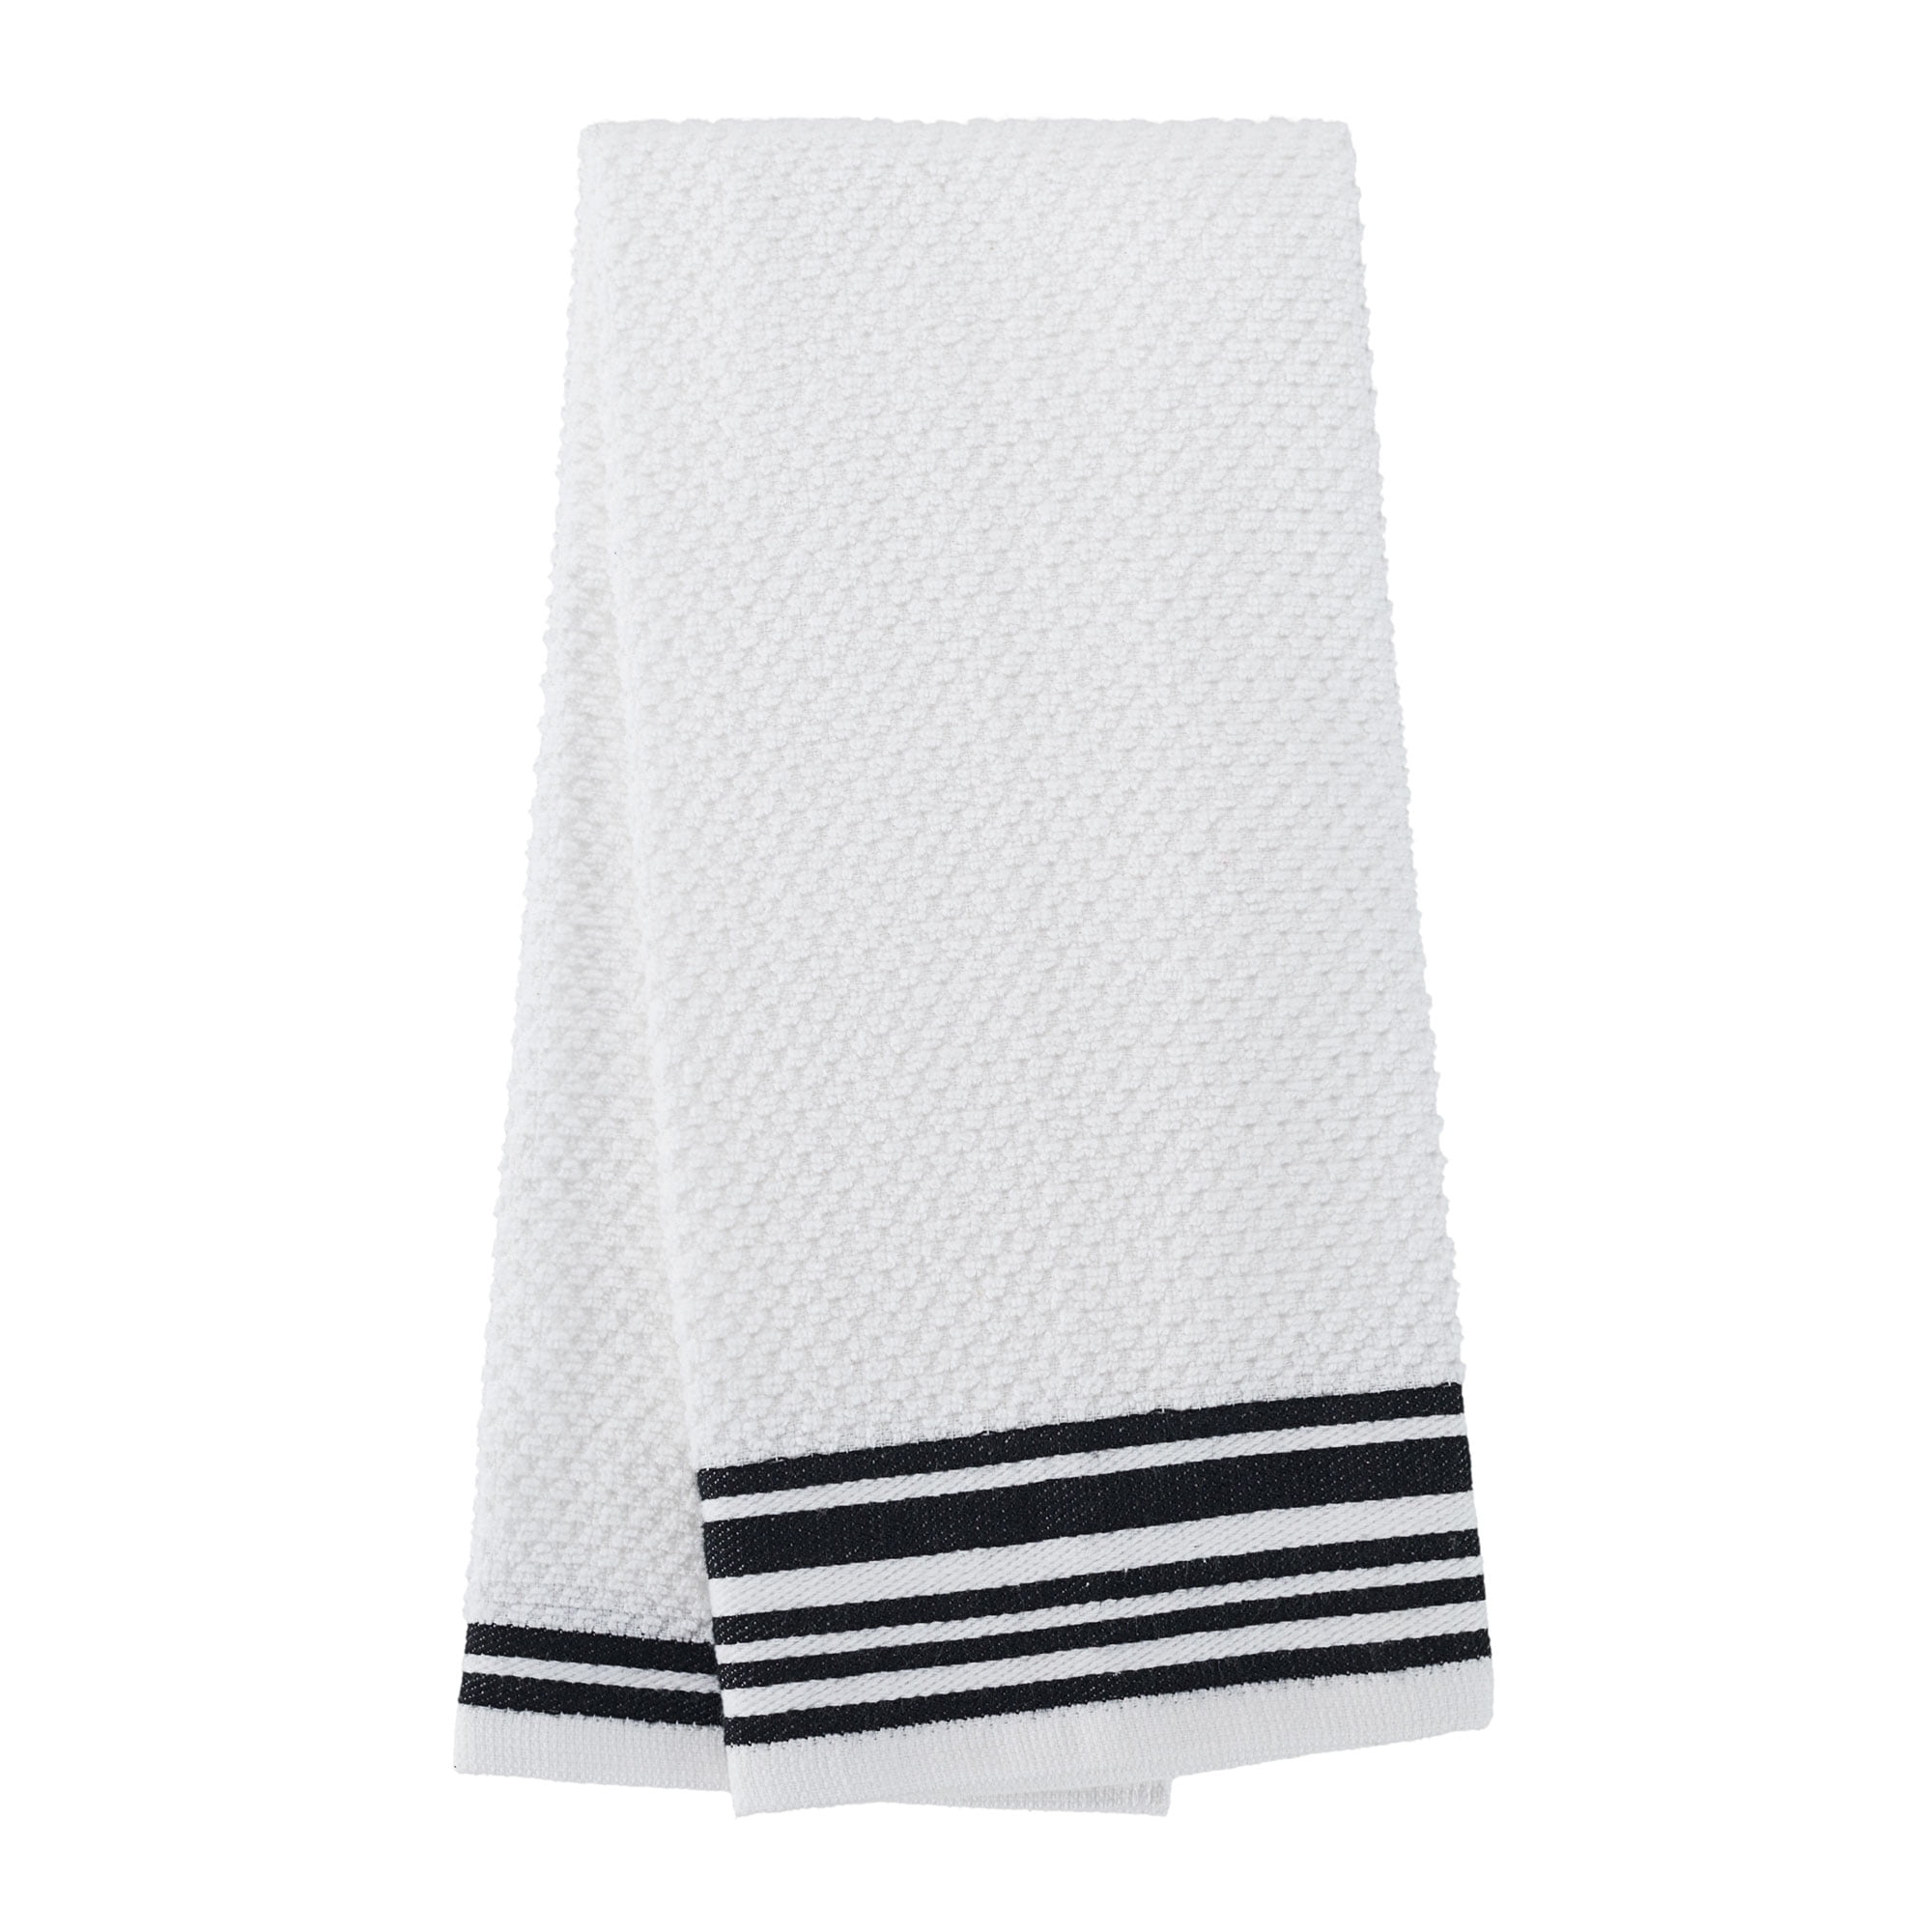 Mellow Buff 100% Cotton Terry Dish Towels, 4 Pack Plain, 16 x26 Inches,  Super Soft and Absorbent Kitchen Towels, Perfect for Kitchen Cleaning and  Dish